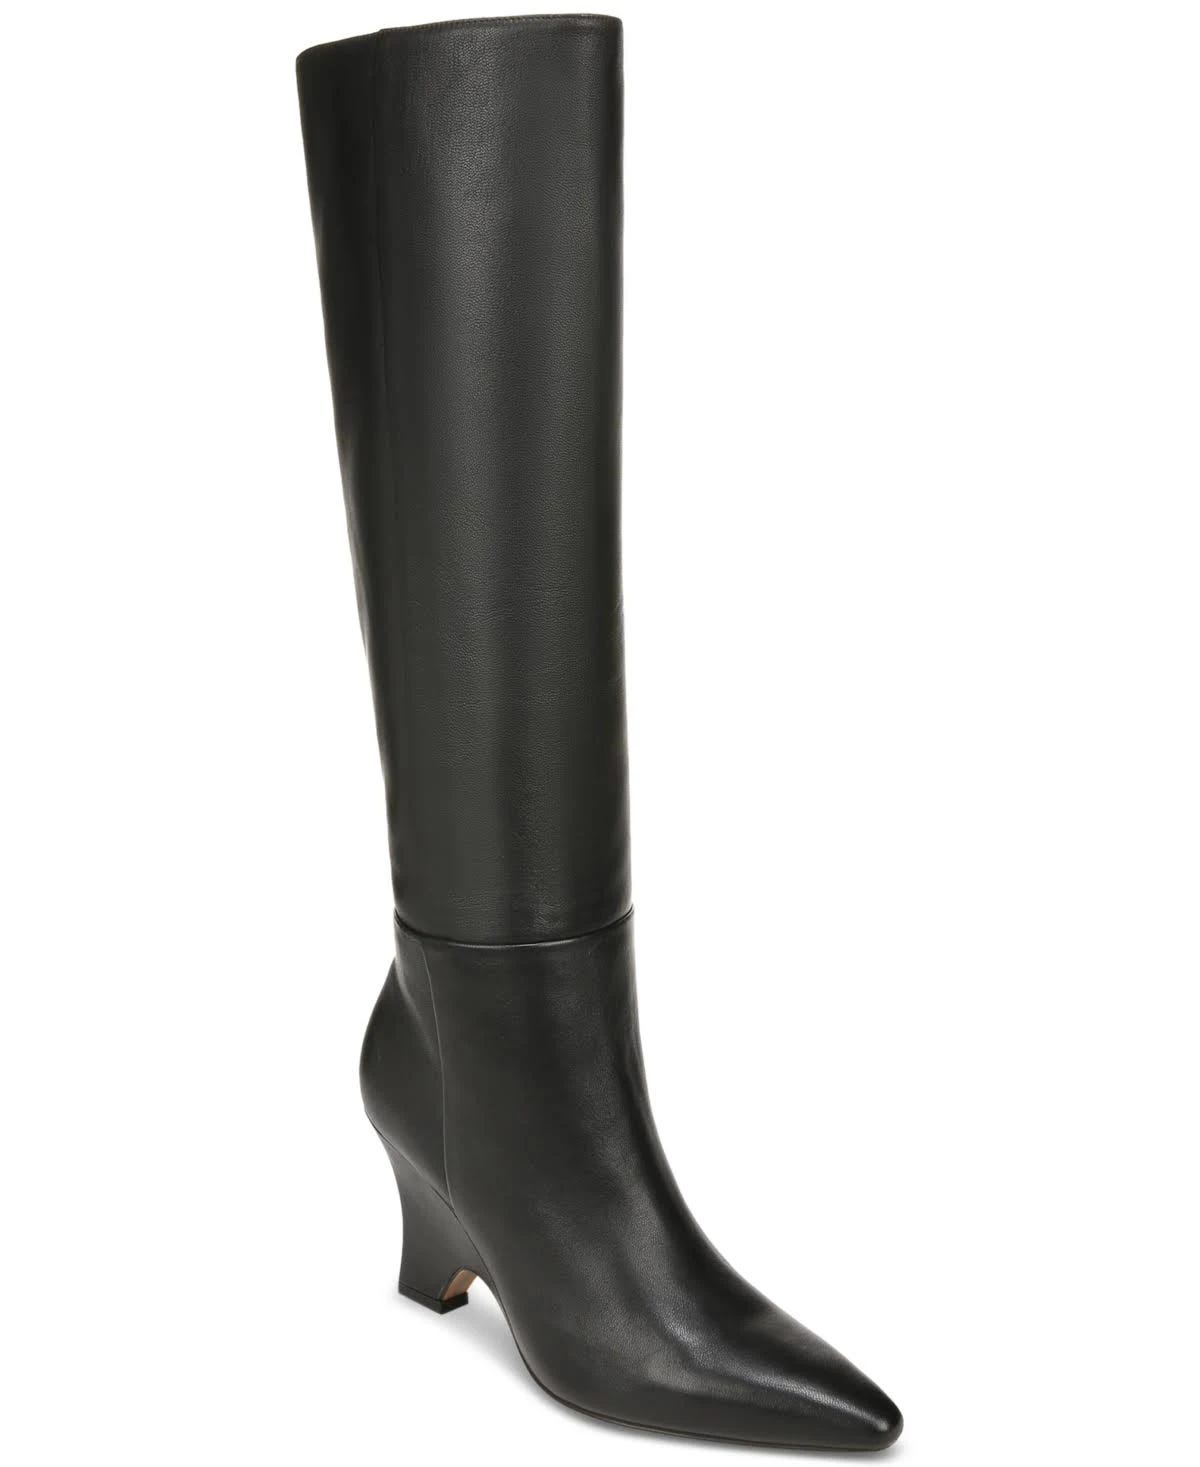 Polished Black Leather Calf Boots for Stylish nights out | Image